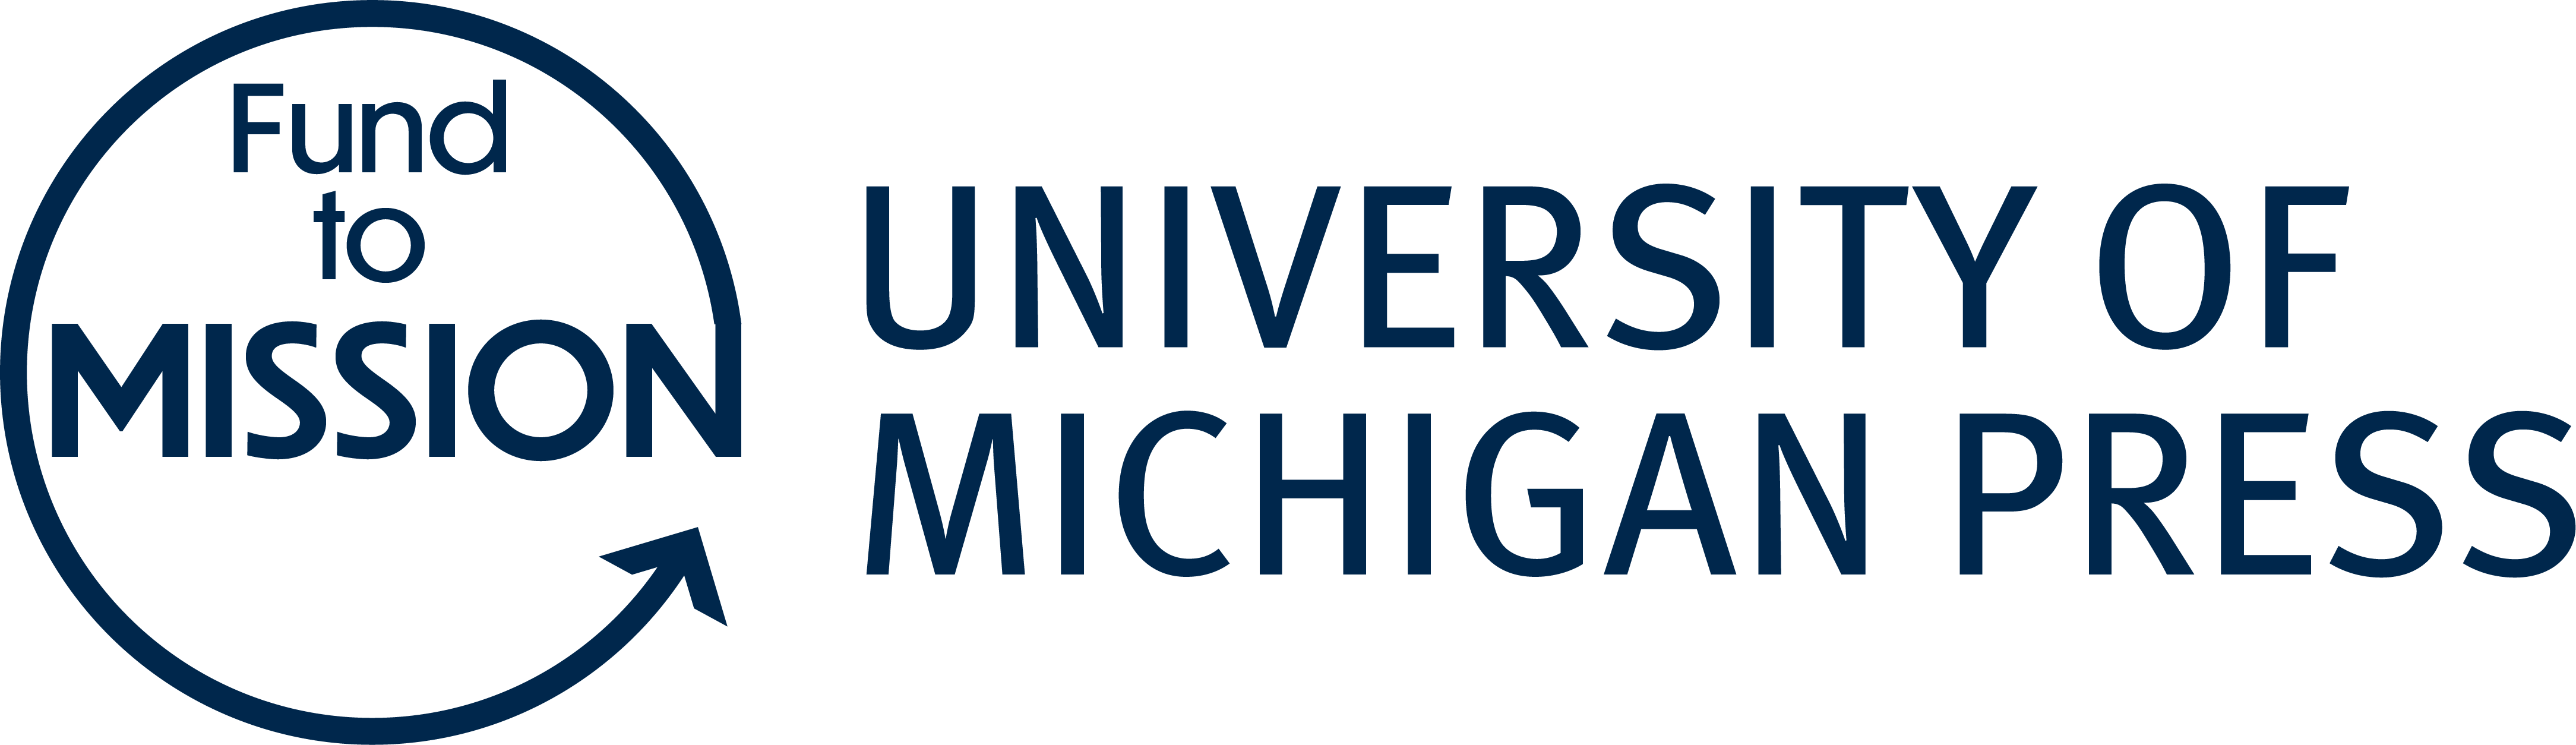 Fund to Mission logo with words University of Michigan Press